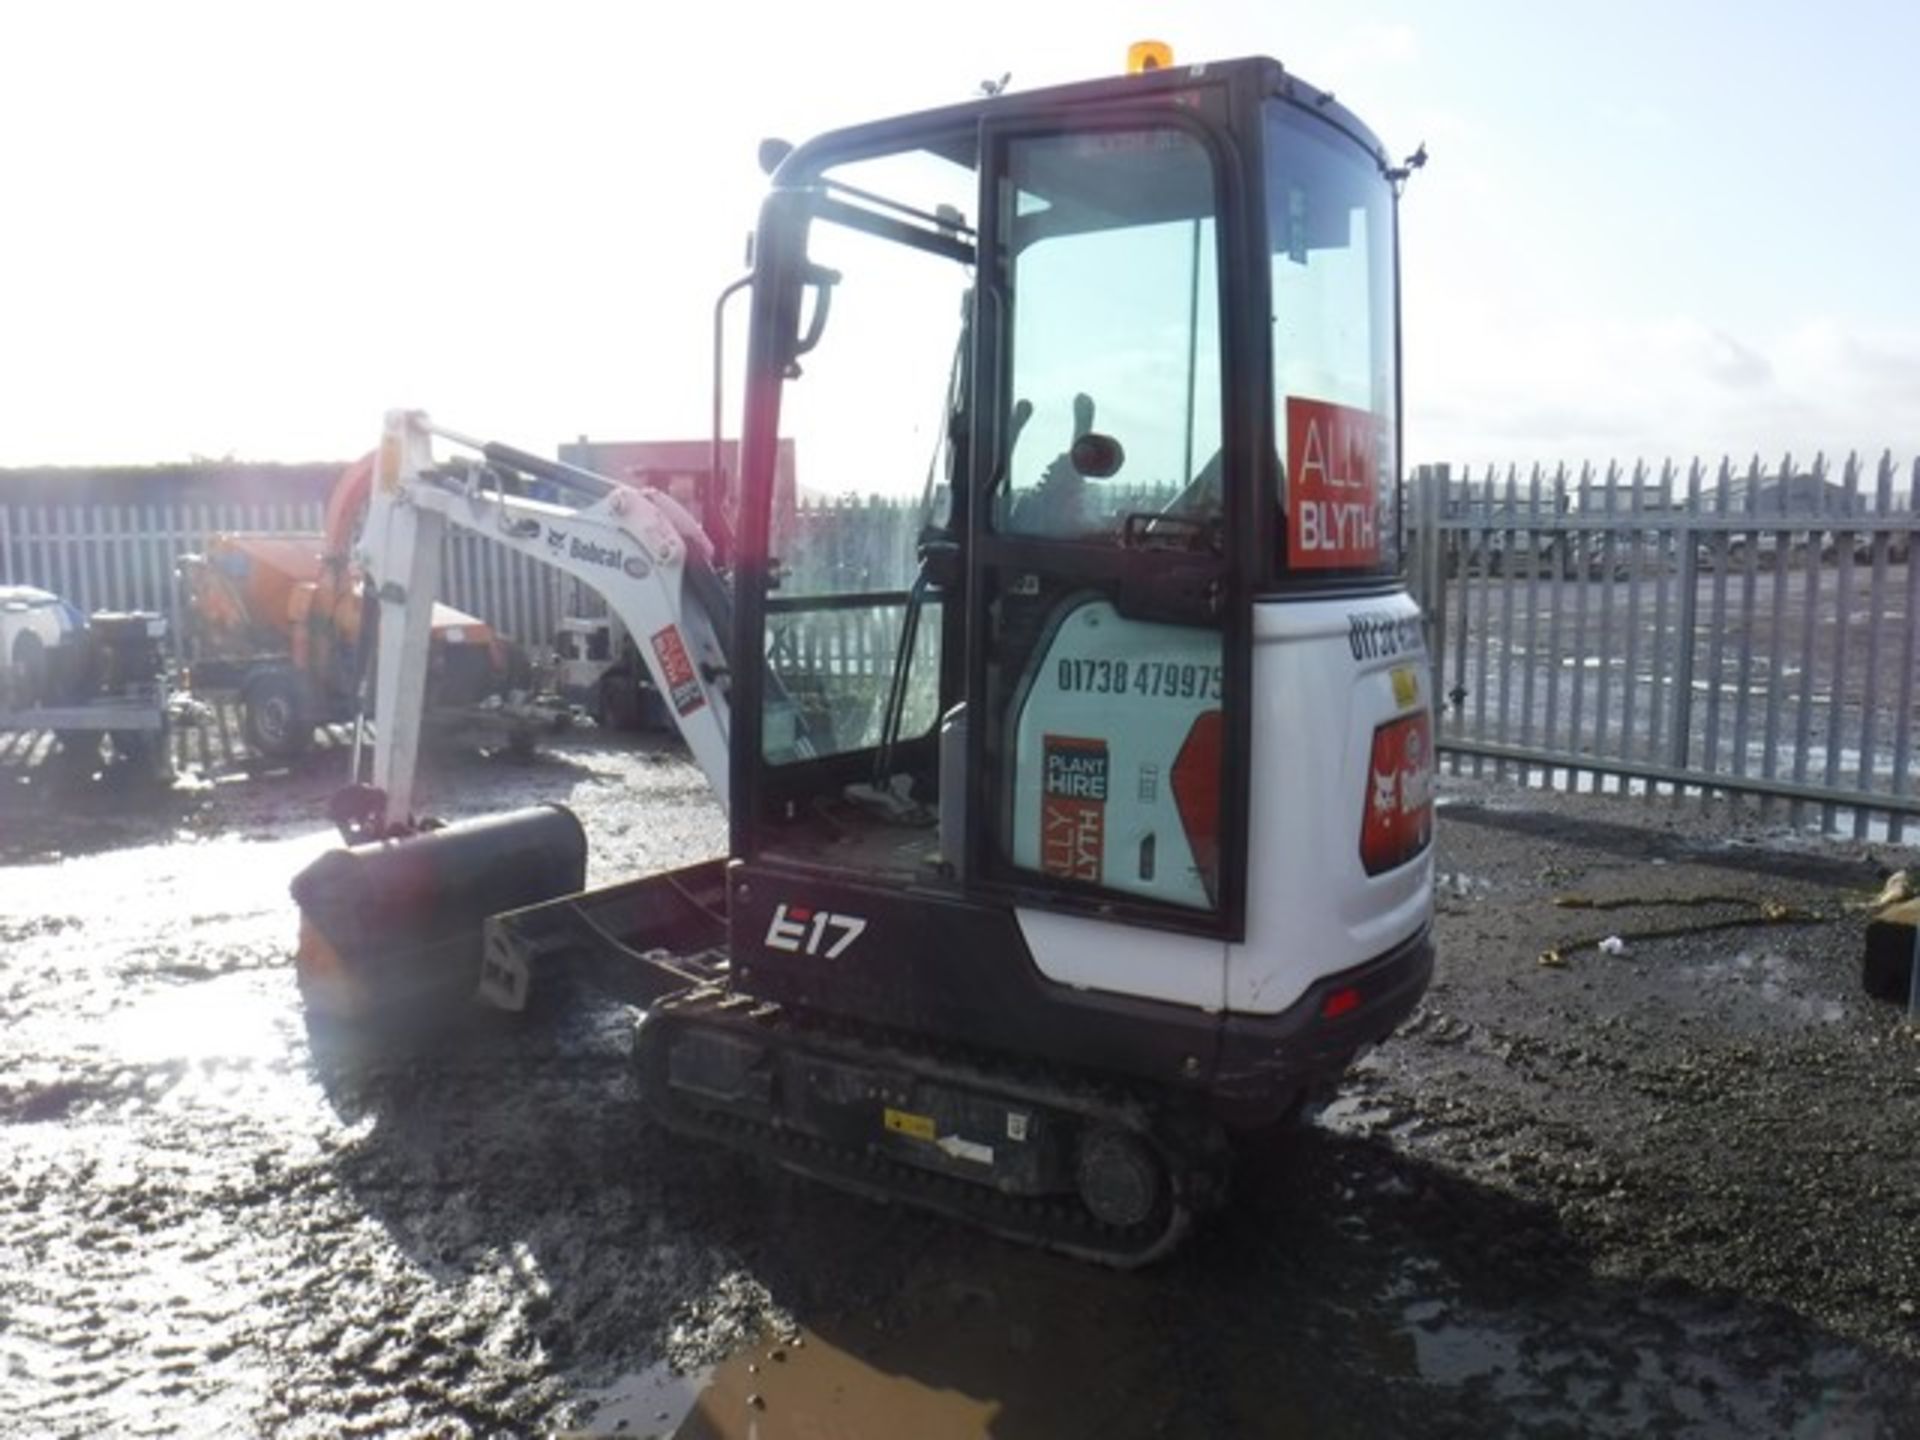 BOB CAT E17 - 2018 COMPACT EXCAVATOR WITH CAB AND BUCKET 166 HRS (NOT VERIFIED) SN - B27H12779 - Image 9 of 12